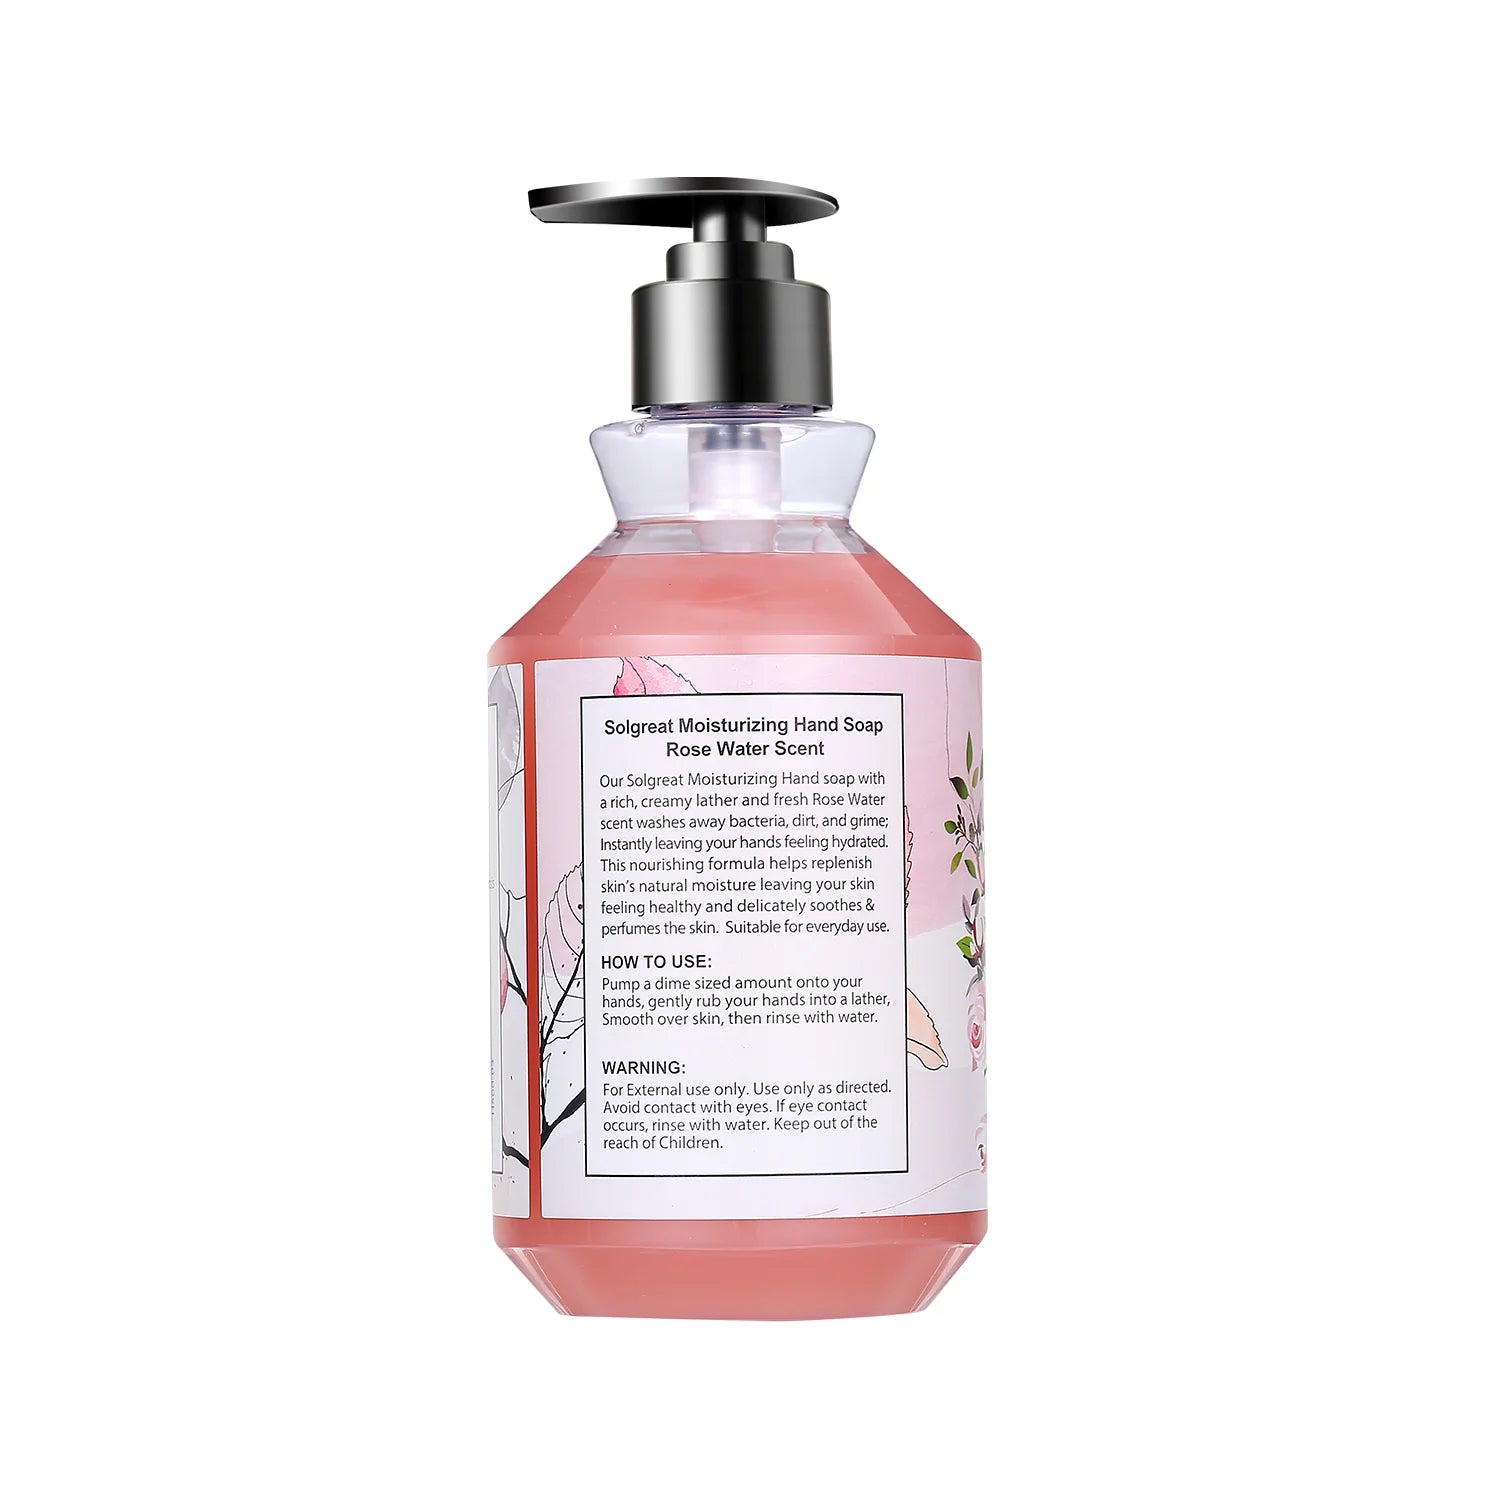 MOISTURIZING HAND SOAP - ROSE WATER SCENT